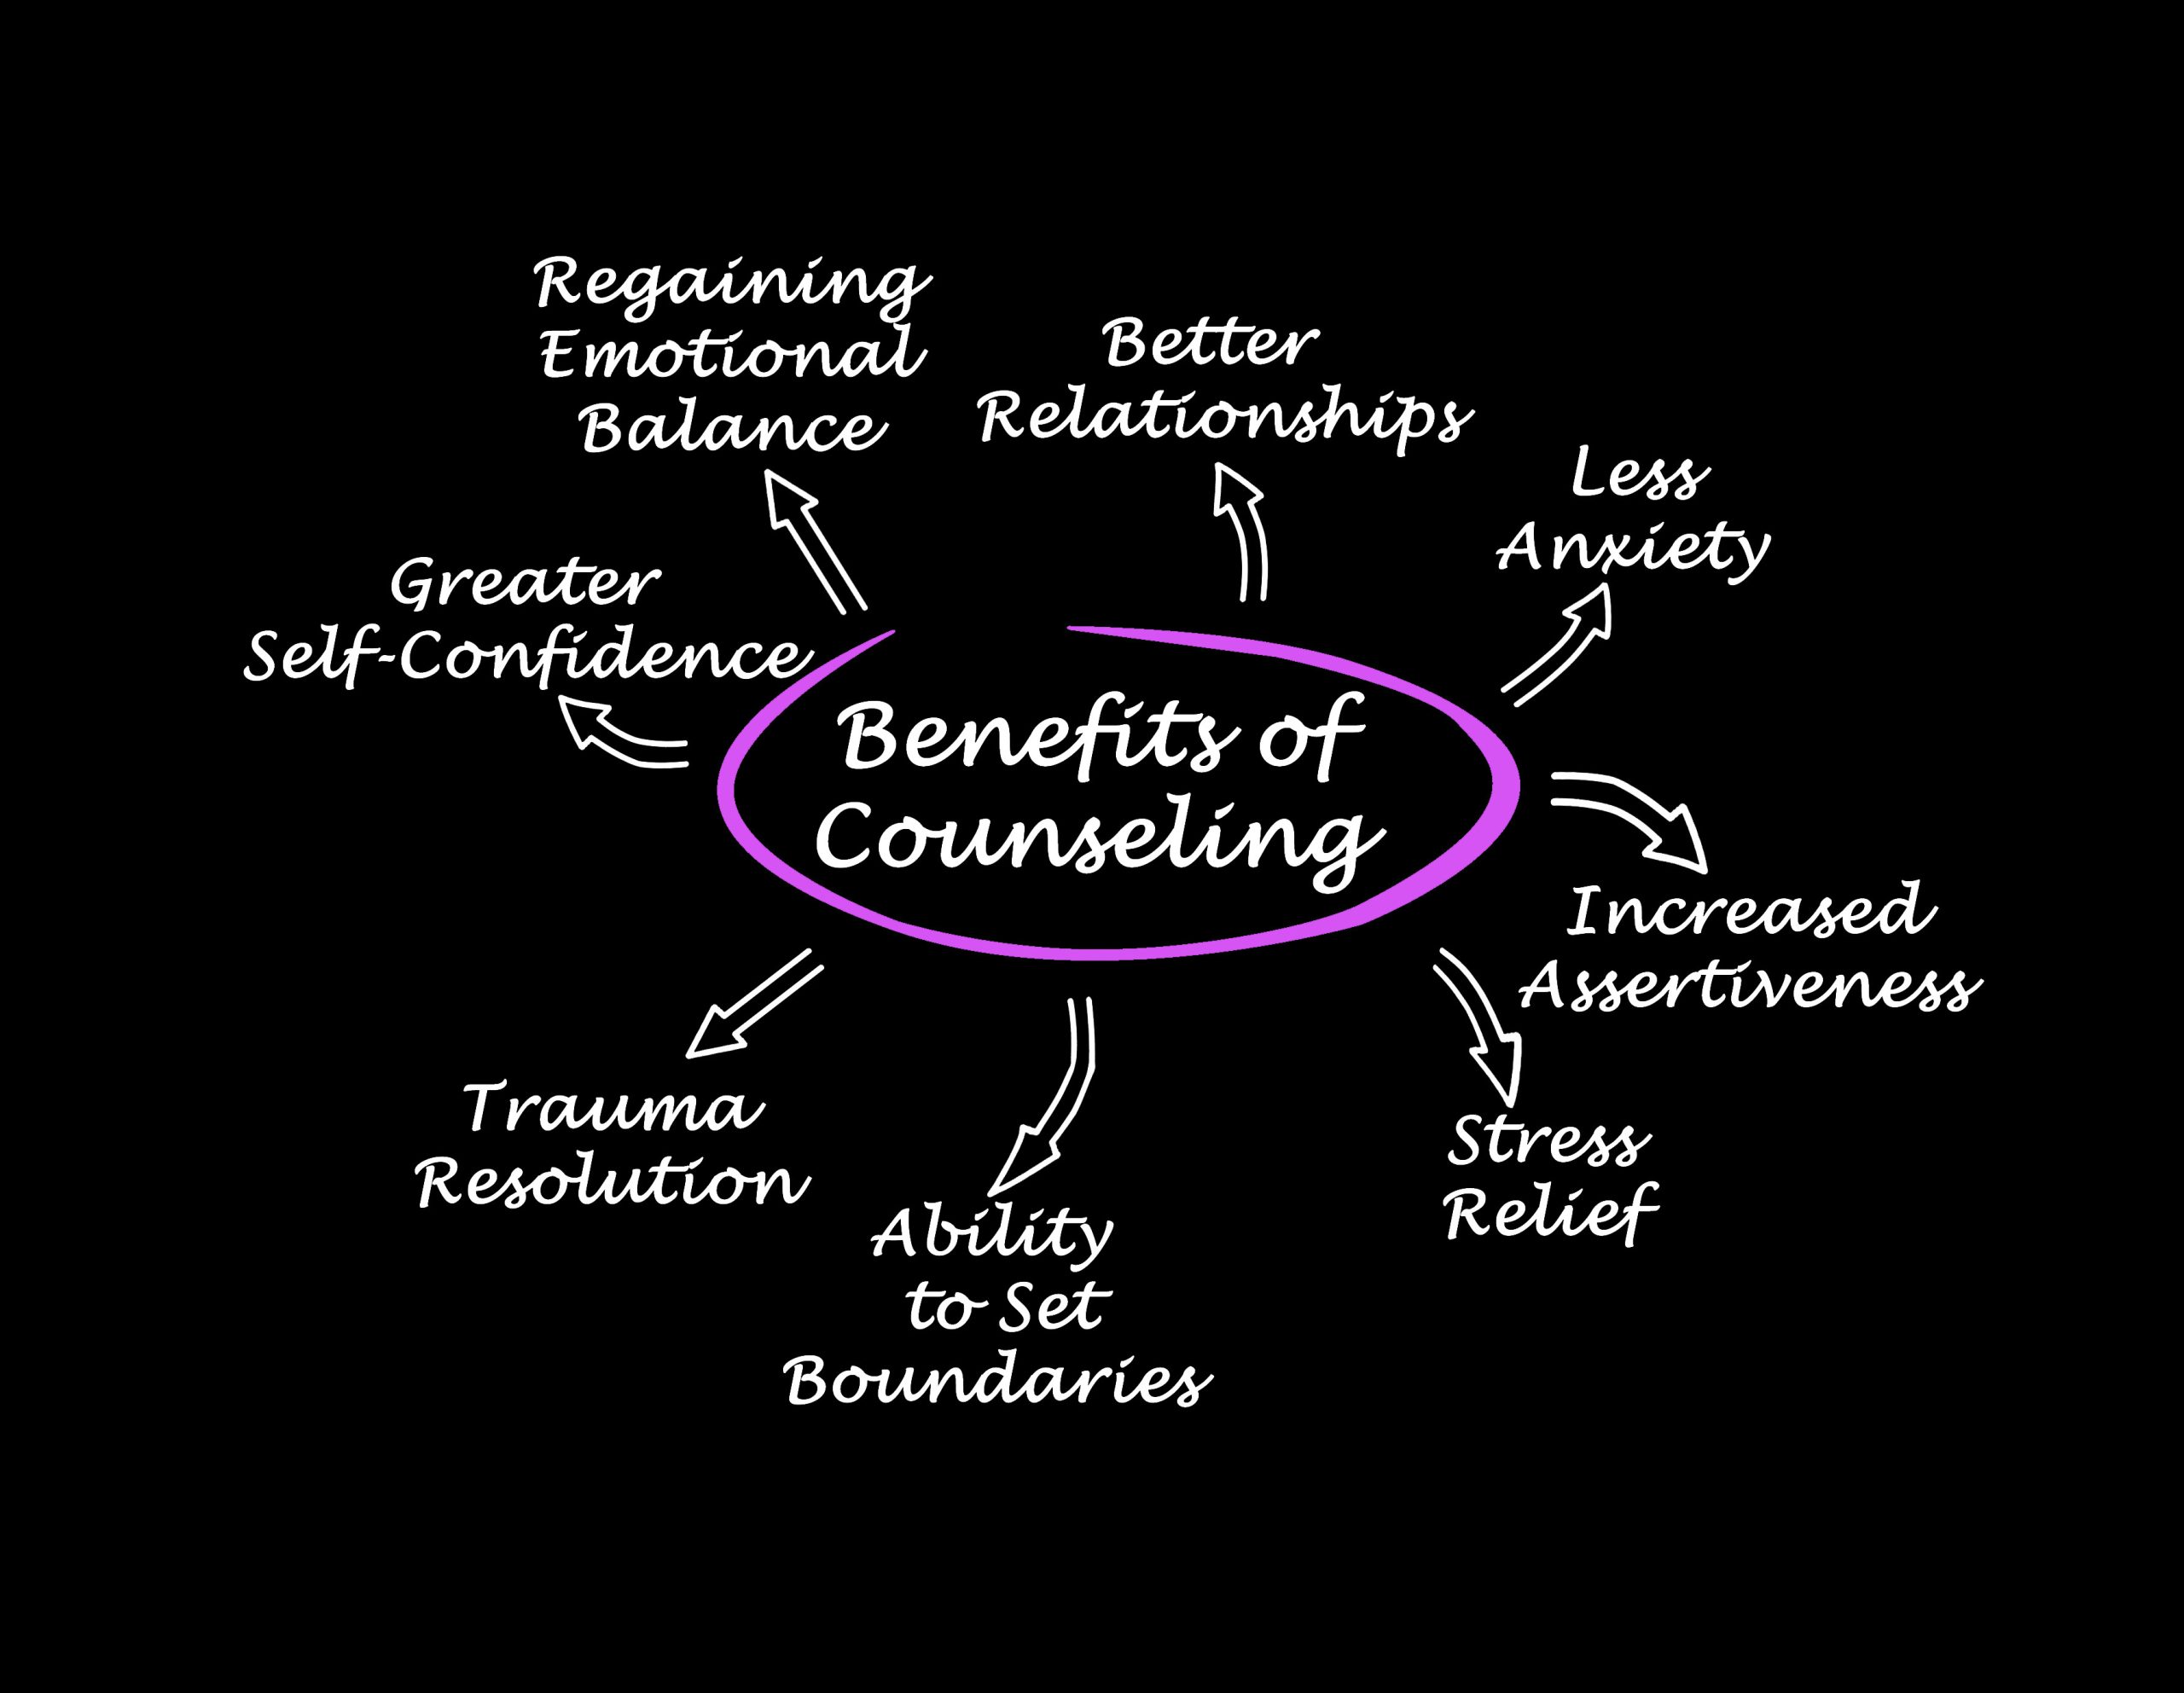 What are the benefits of Counselling?